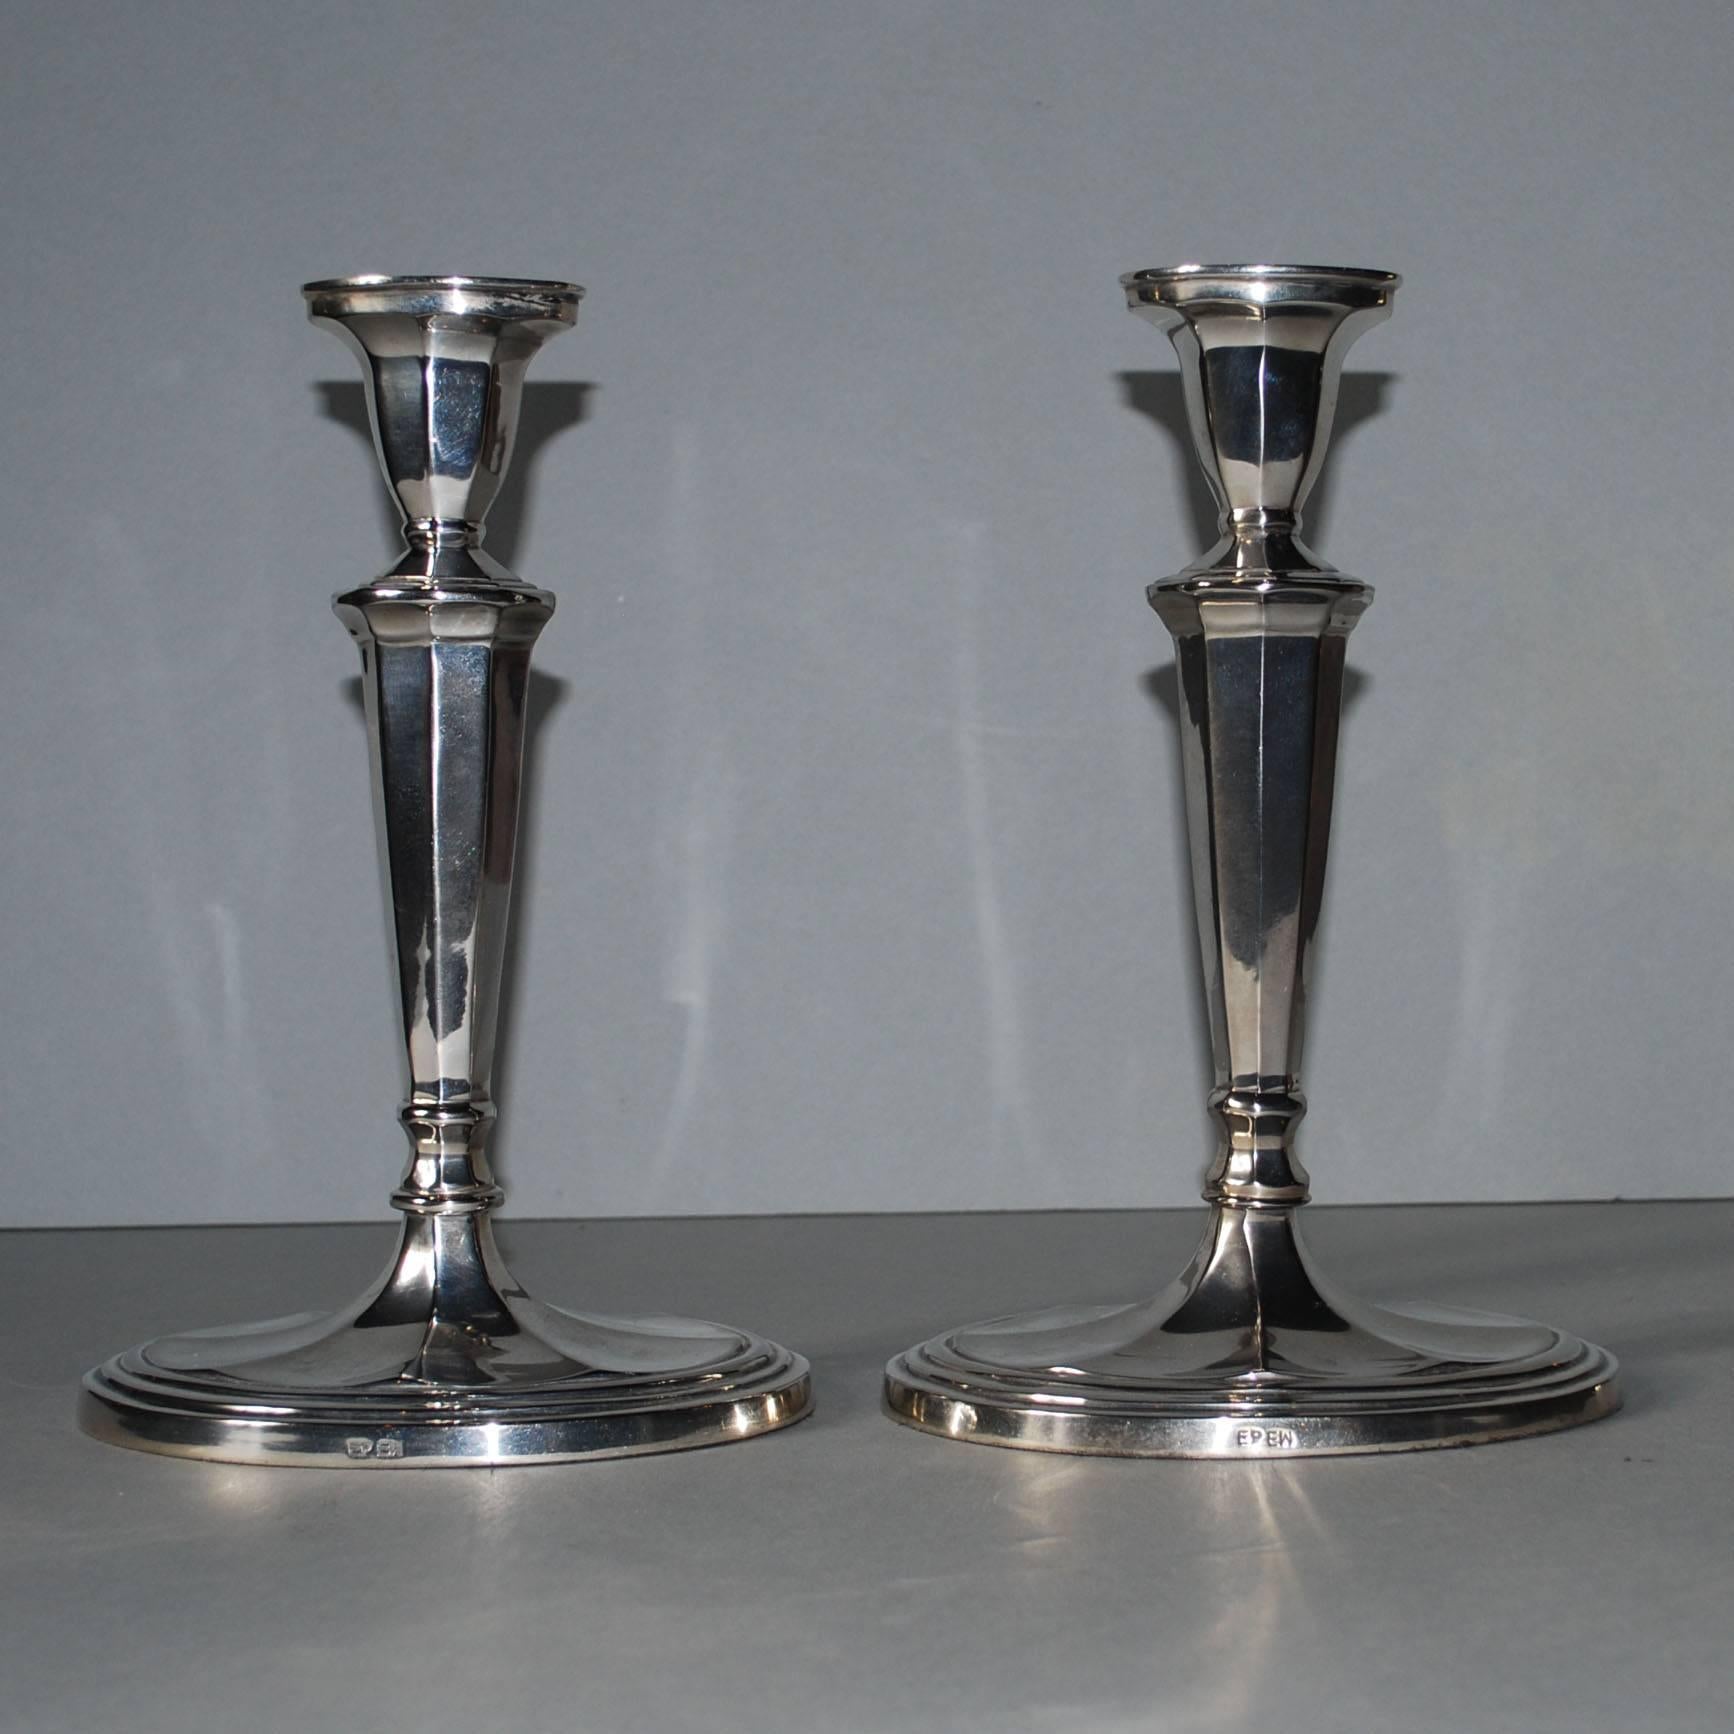 Pair of 20th century silver plated candlesticks.
Originates England, dating circa 1920.
(Shipping costs on request, depends on destination).